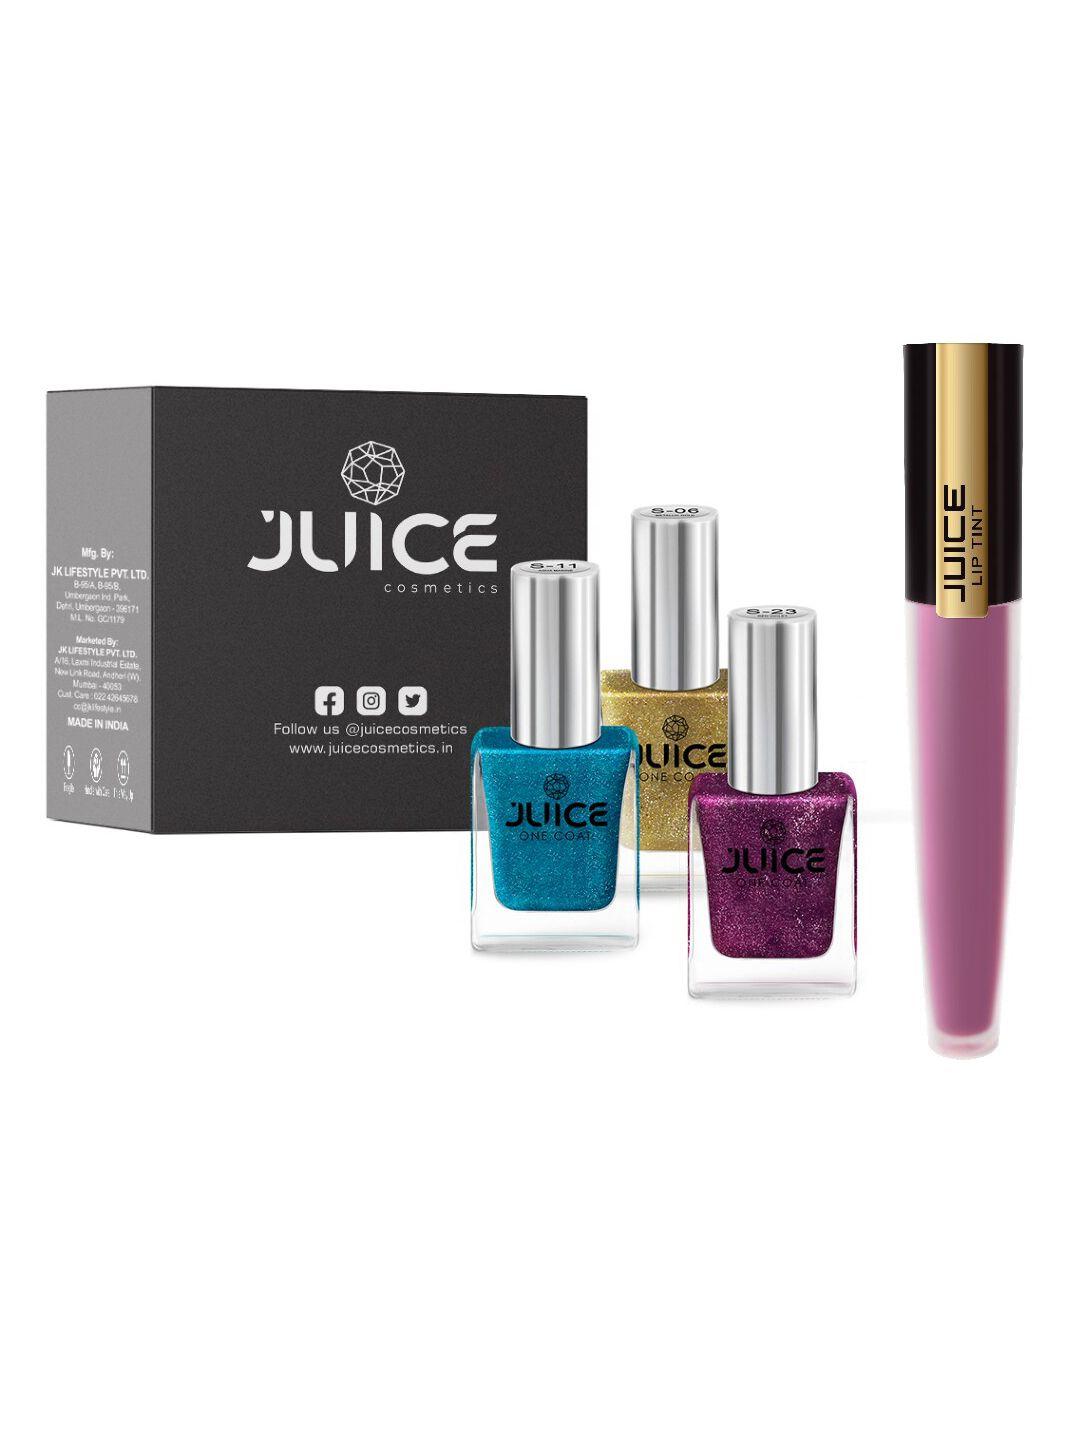 juice set of 3 one coat nail polishes with lip tint - hollywood nights m-83